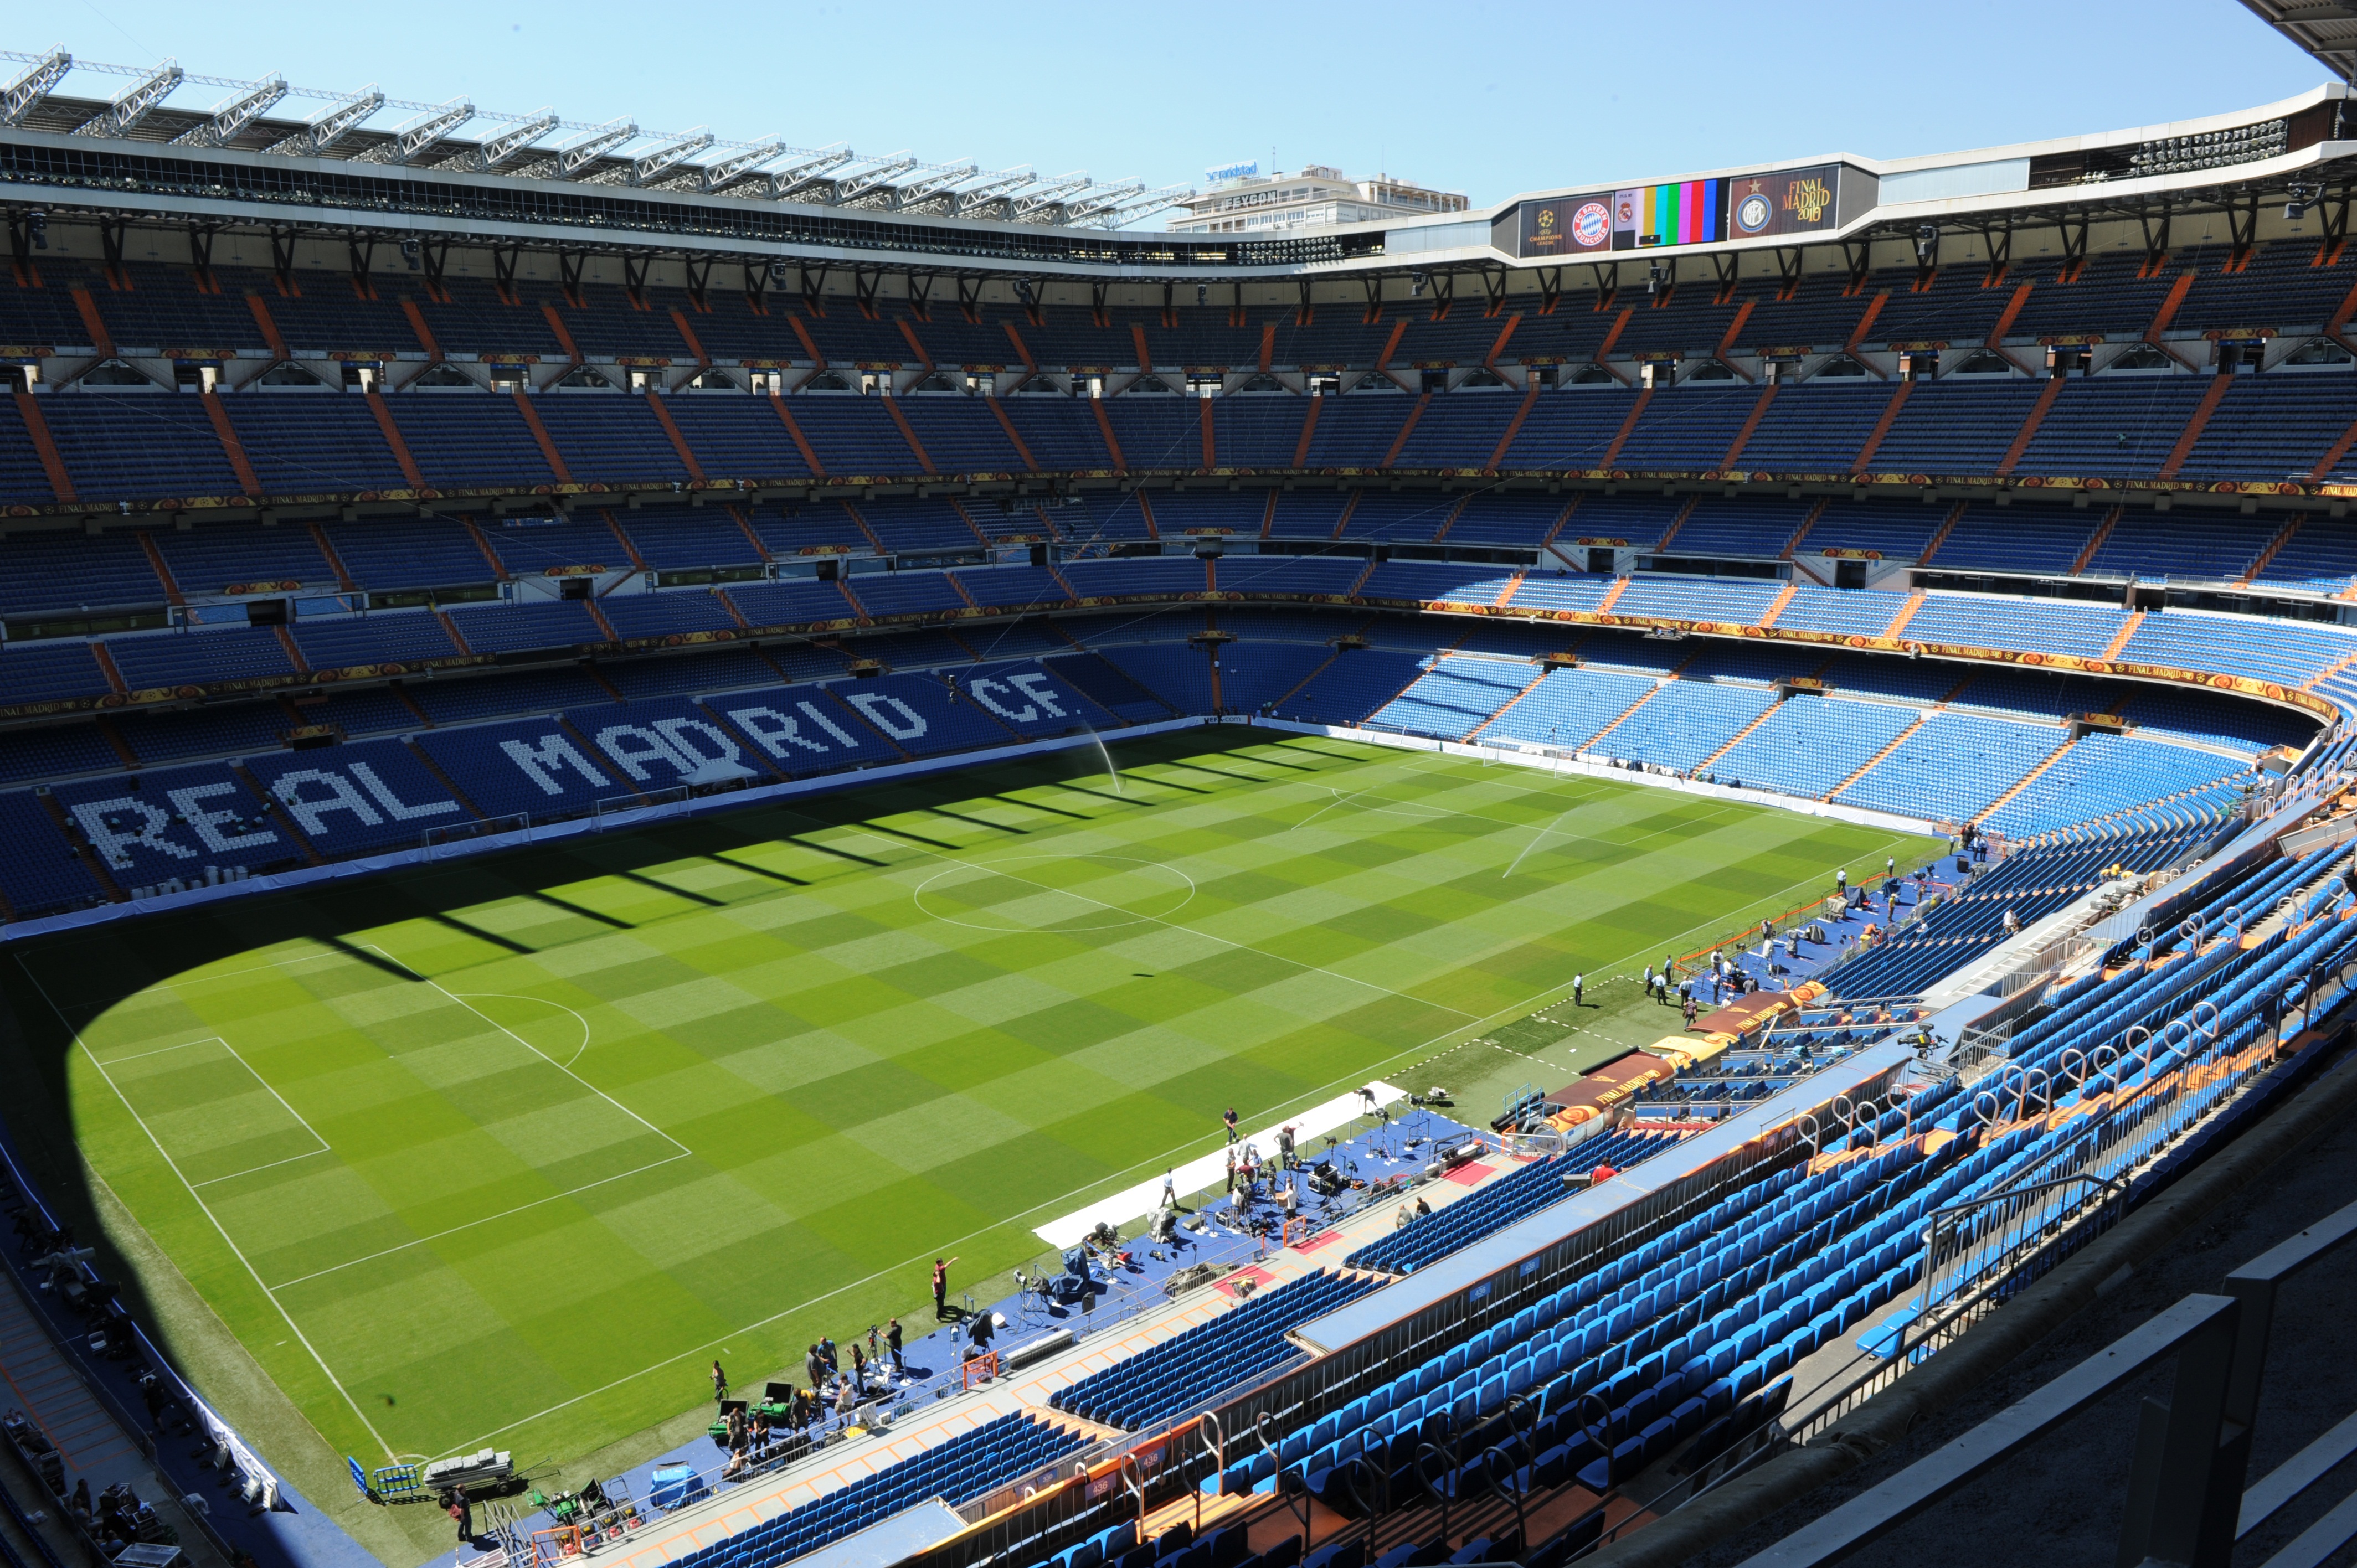 Inside view of the Santiago Bernabeu stadium in Madrid taken on May 21, 2010 on the eve of the UEFA Champions League final football match. Inter Milan will face Bayern Munich in the UEFA Champions League final match to be played at the Santiago Bernabeu Stadium in Madrid on May 22, 2010.  AFP PHOTO / MLADEN ANTONOV (Photo credit should read MLADEN ANTONOV/AFP/Getty Images)